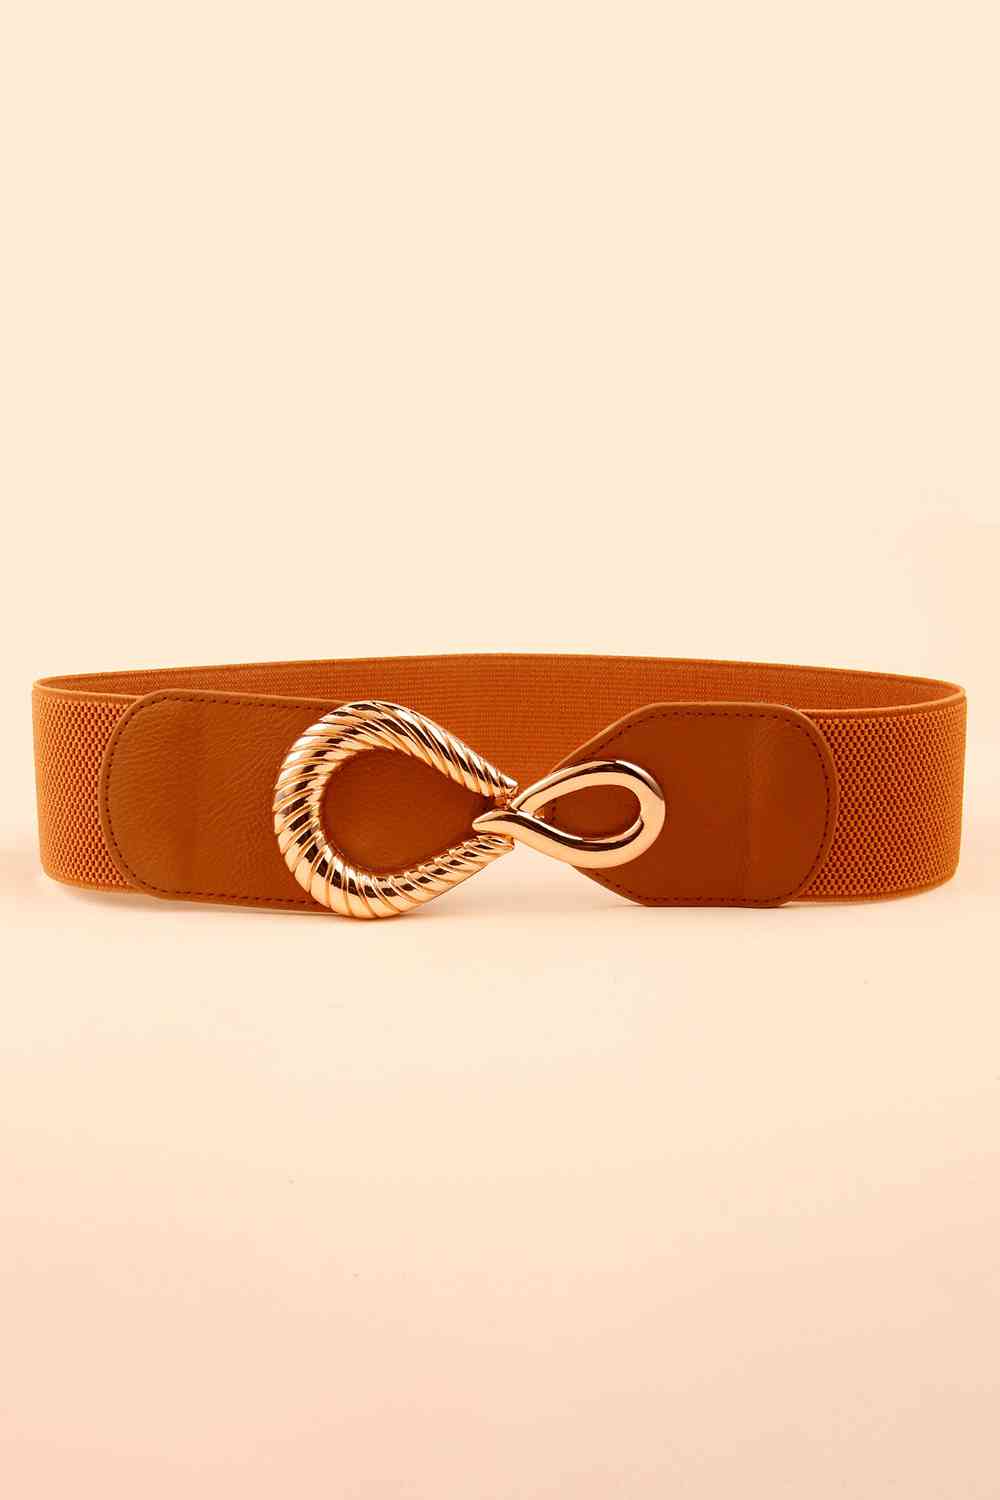 Ribbed Alloy Buckle Elastic Belt Ochre One Size